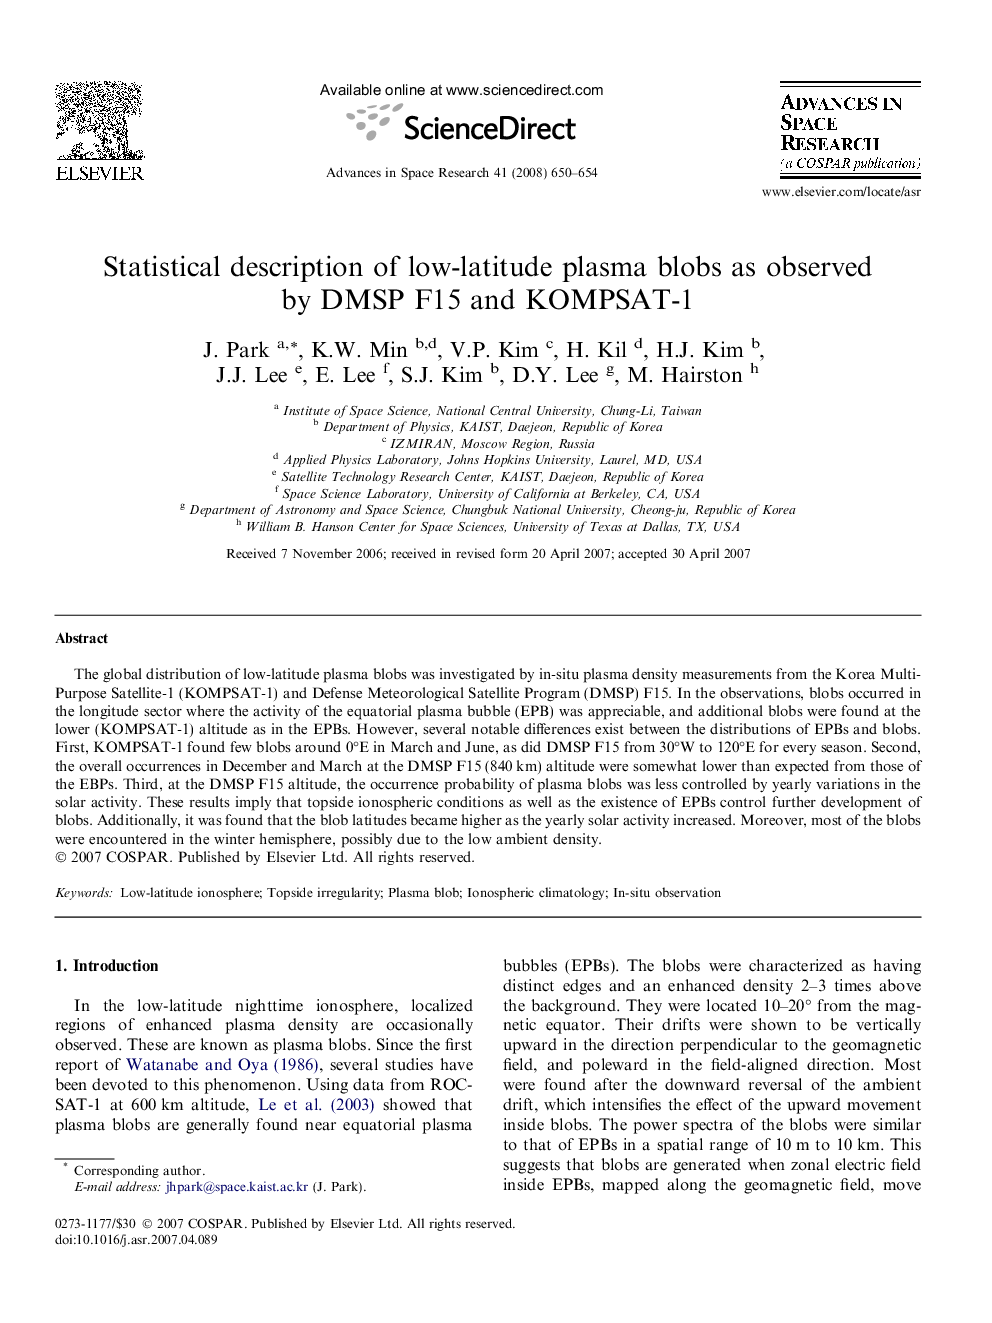 Statistical description of low-latitude plasma blobs as observed by DMSP F15 and KOMPSAT-1